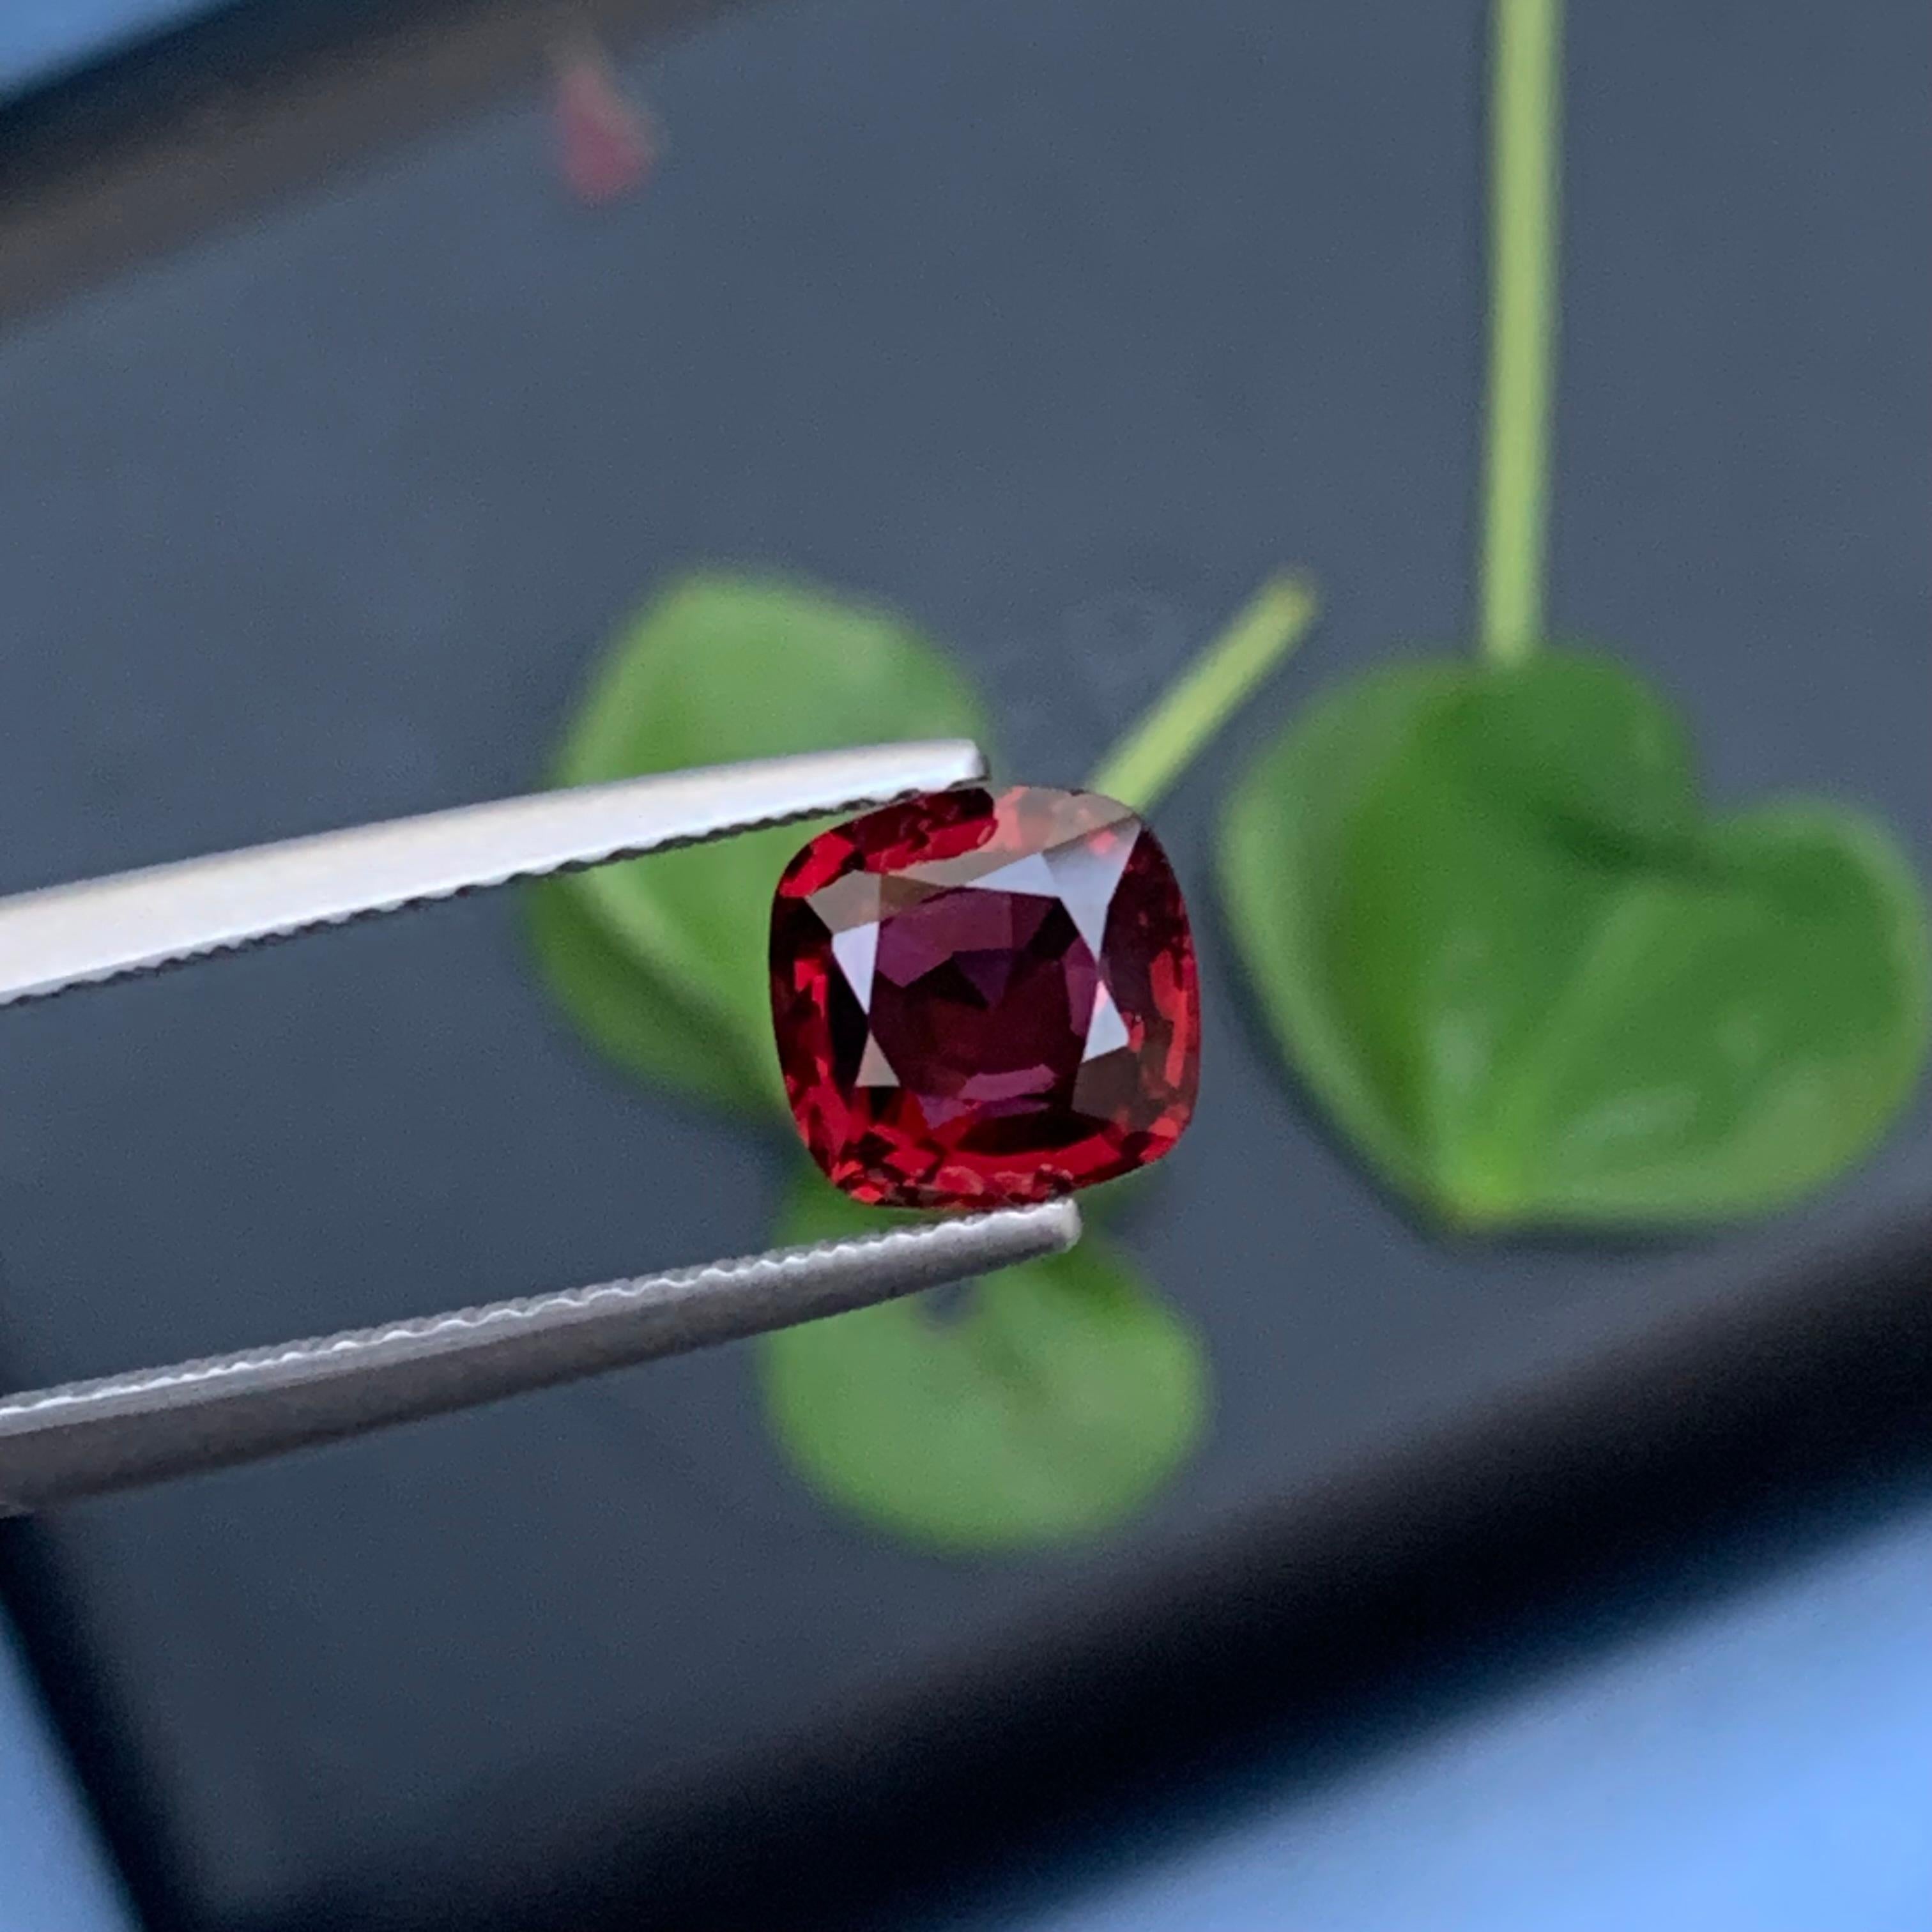 Stunning 1.60 Carat Natural Loose Red Spinel from Myanmar Burma Cushion Shape For Sale 1